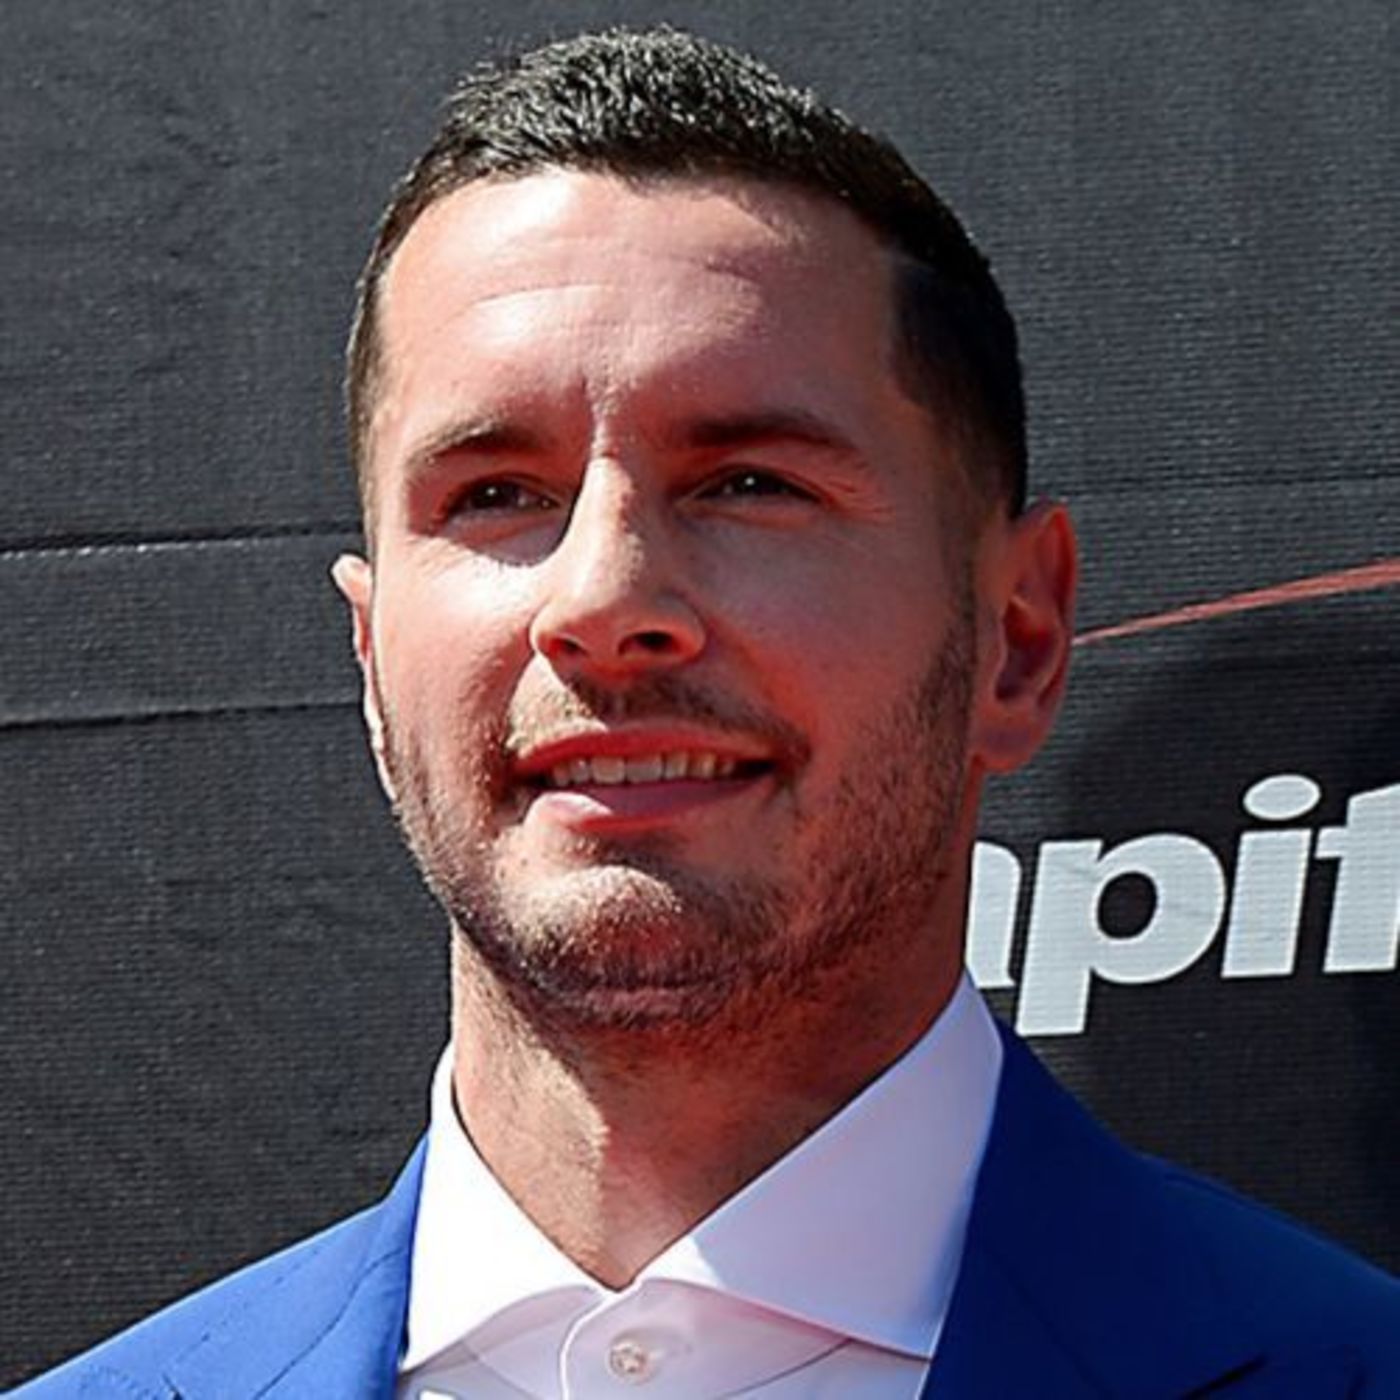 J.J. Redick on Clippers and his new tattoo